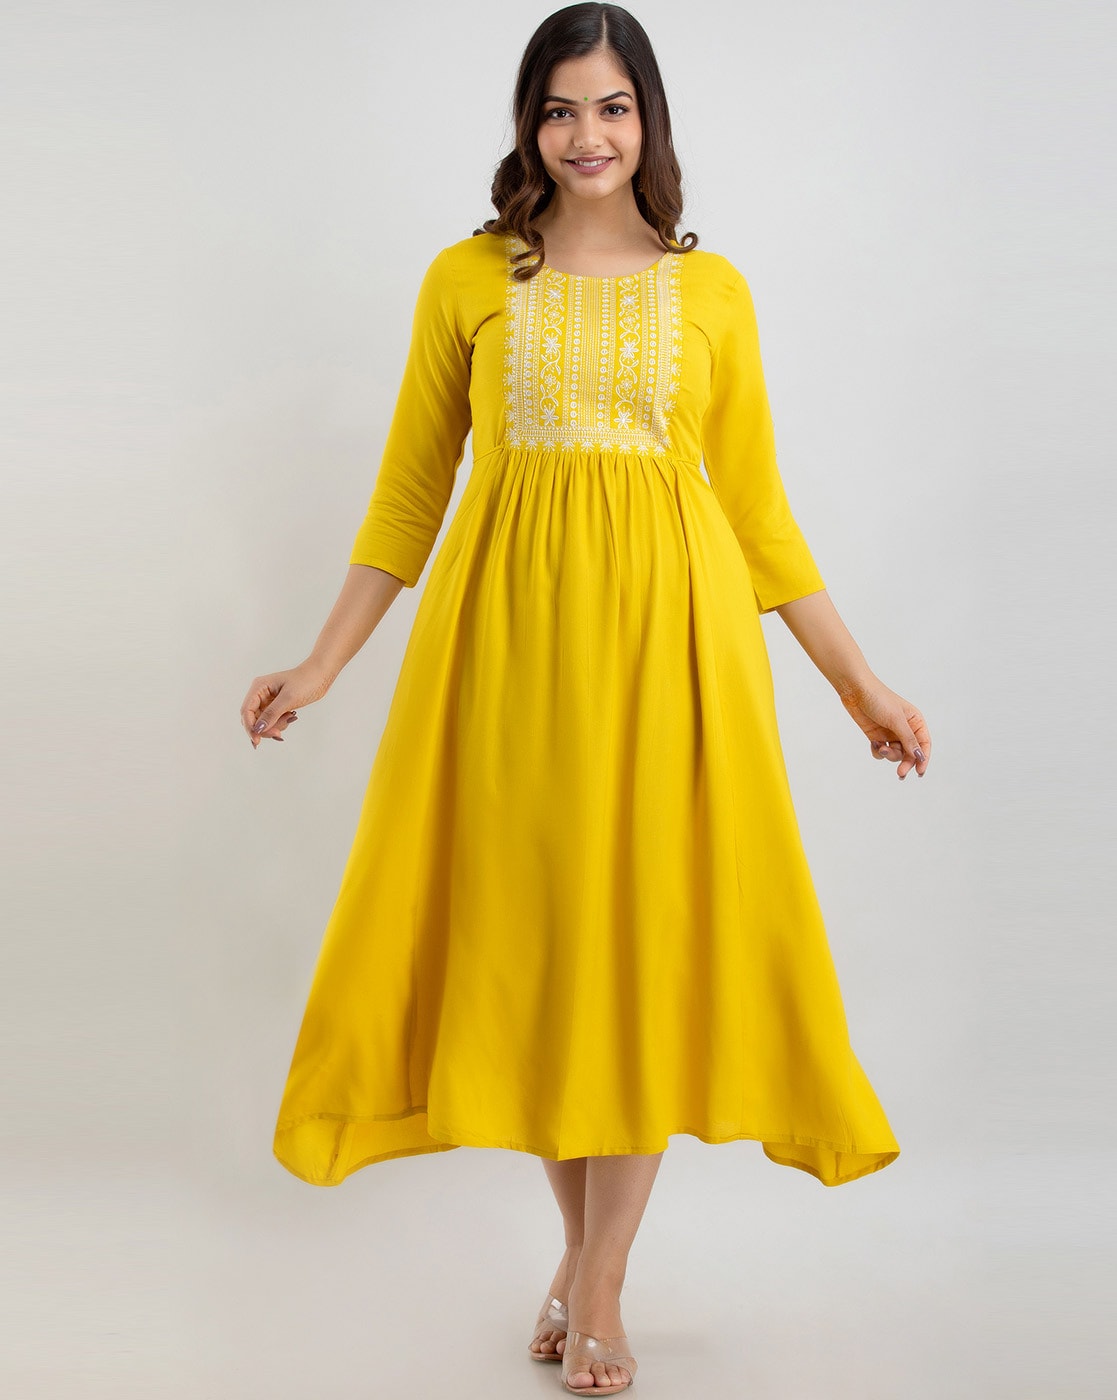 Buy Stylish Women's Dress Yellow Colour from Femaleish (Small) at Amazon.in